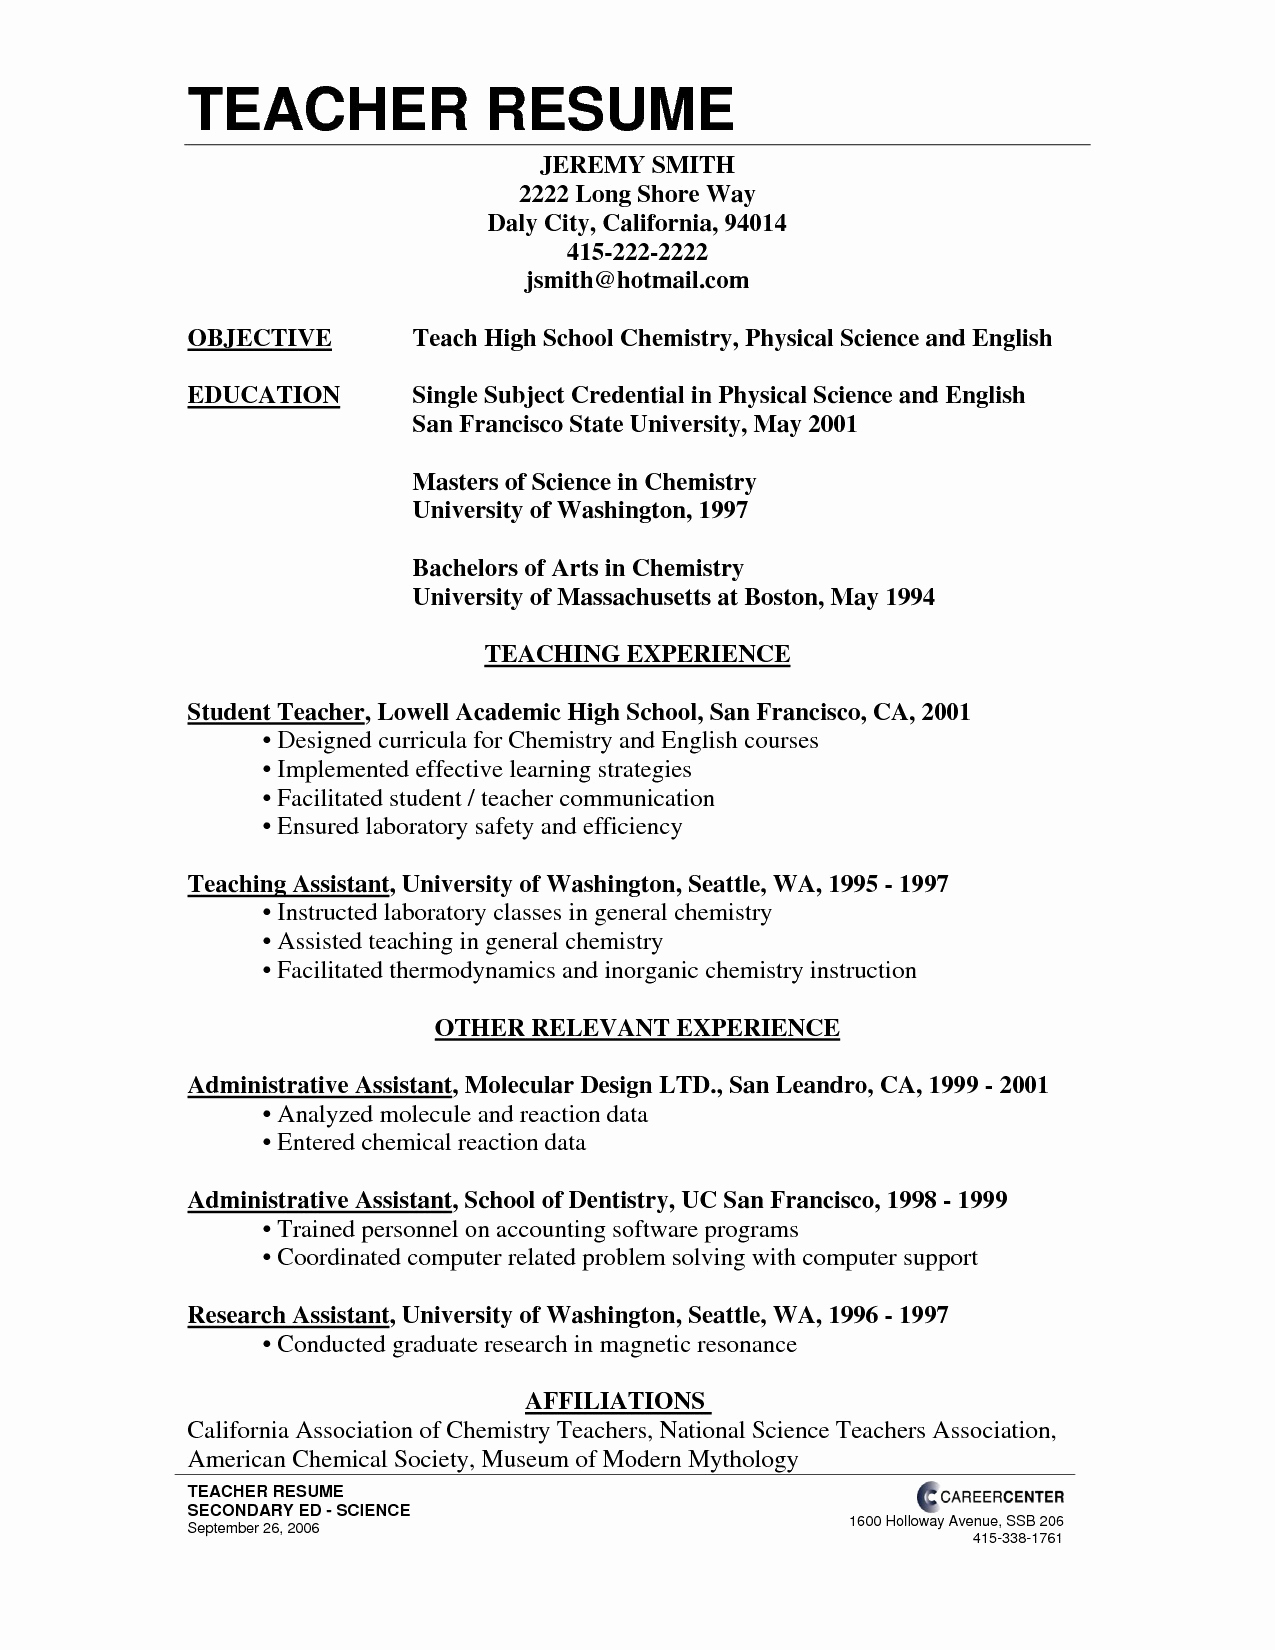 Microsoft Word Cover Letter Template - Resume Templates Word Free New Free Cover Letter Templates Examples